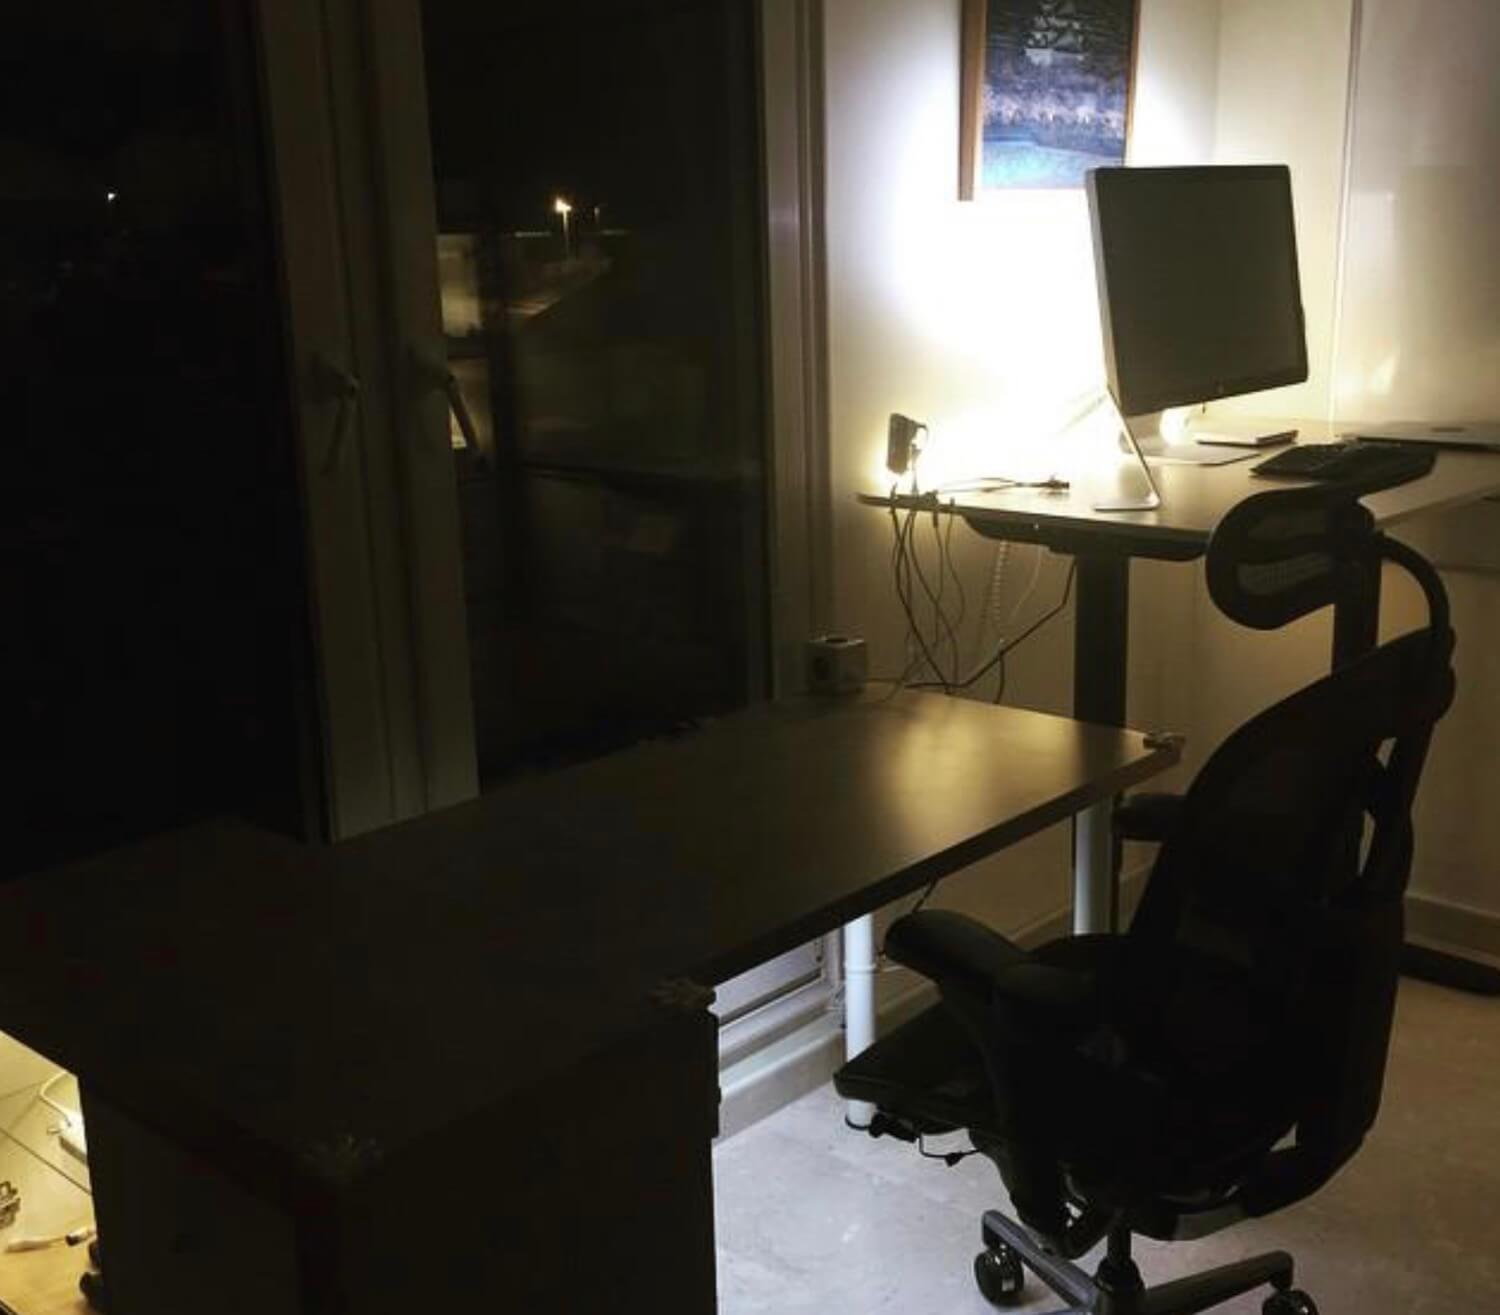 My Home Office 2015 renovation with Ikea’s height-adjustable desk - ambient light